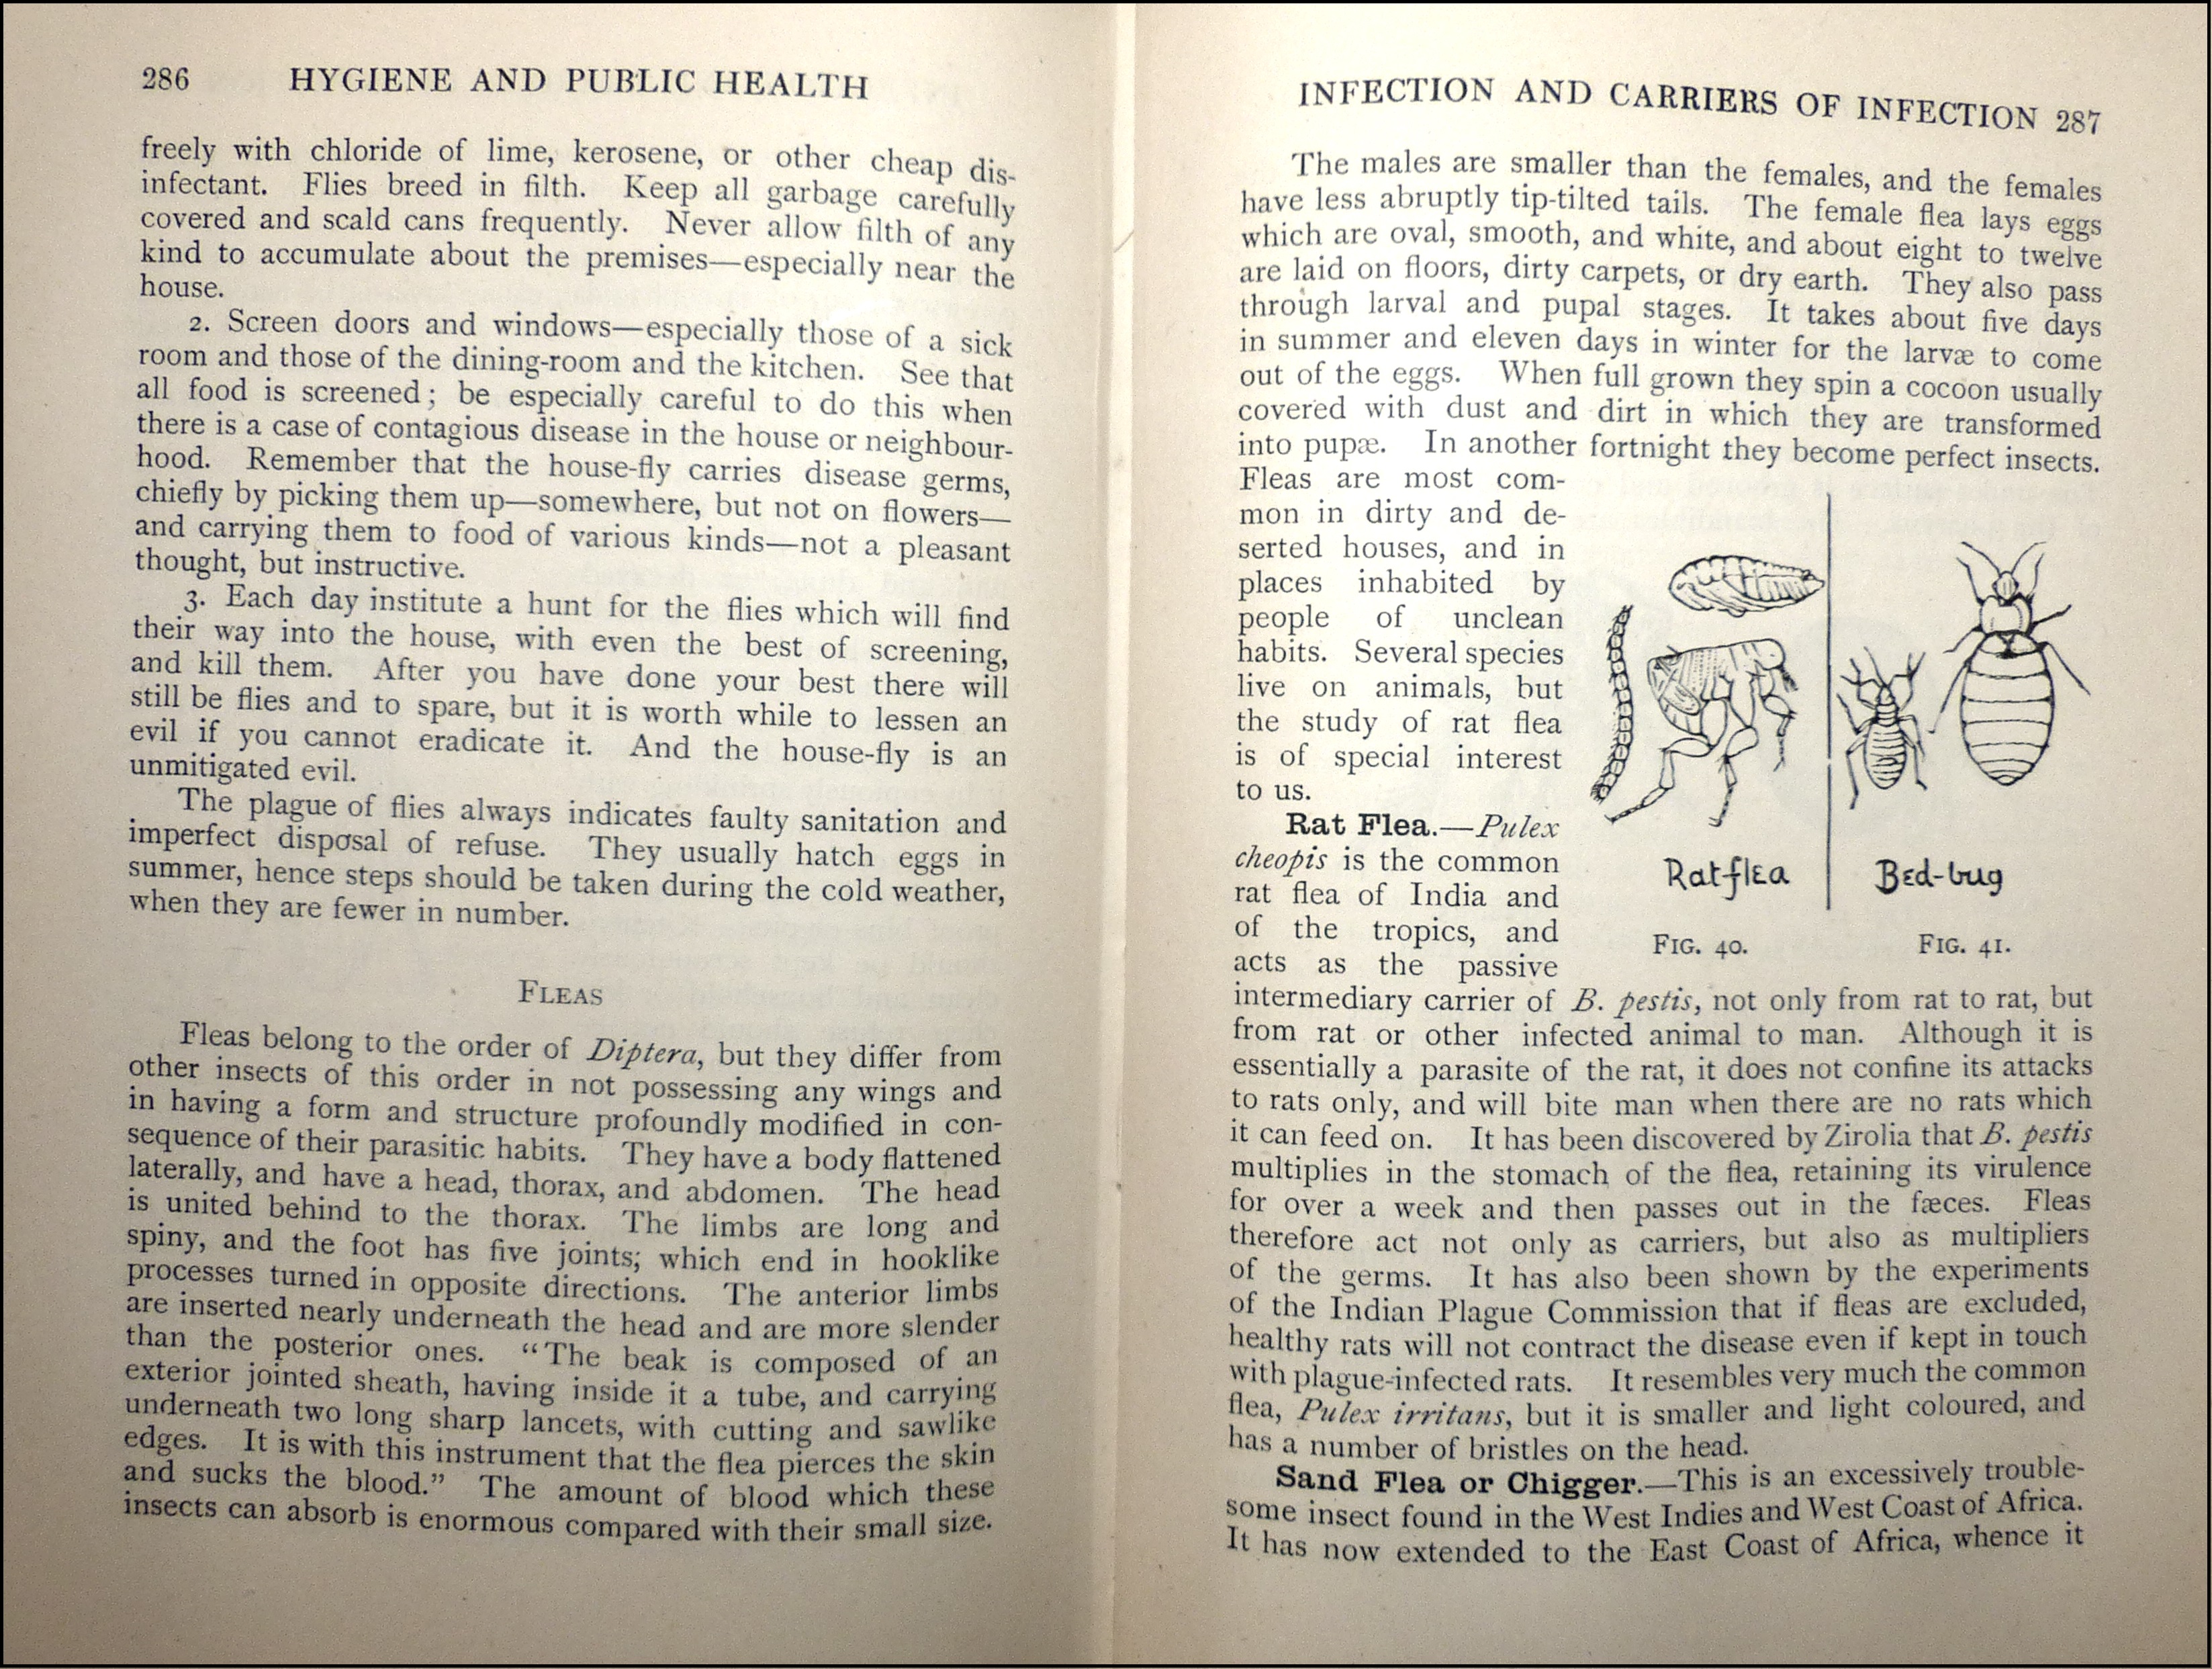 A treatise on hygiene and public health: with special reference to the tropics  Ghosh, B. N.  3rd ed. Calcutta: Hilton & Company, 1917.  STORE 103:38